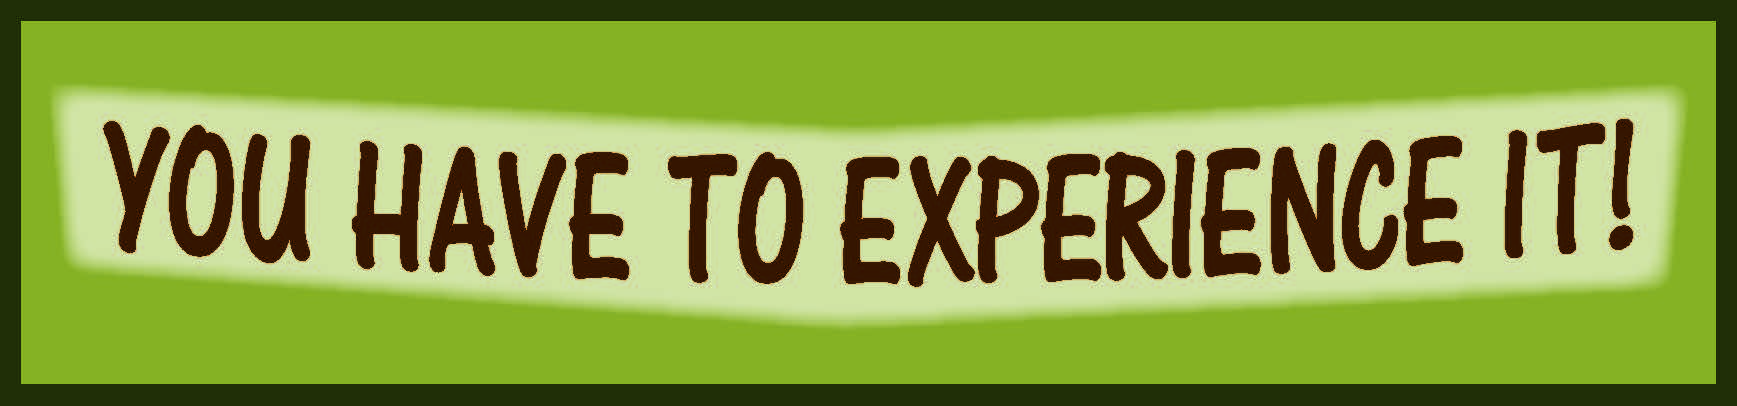 you have to experience it banner